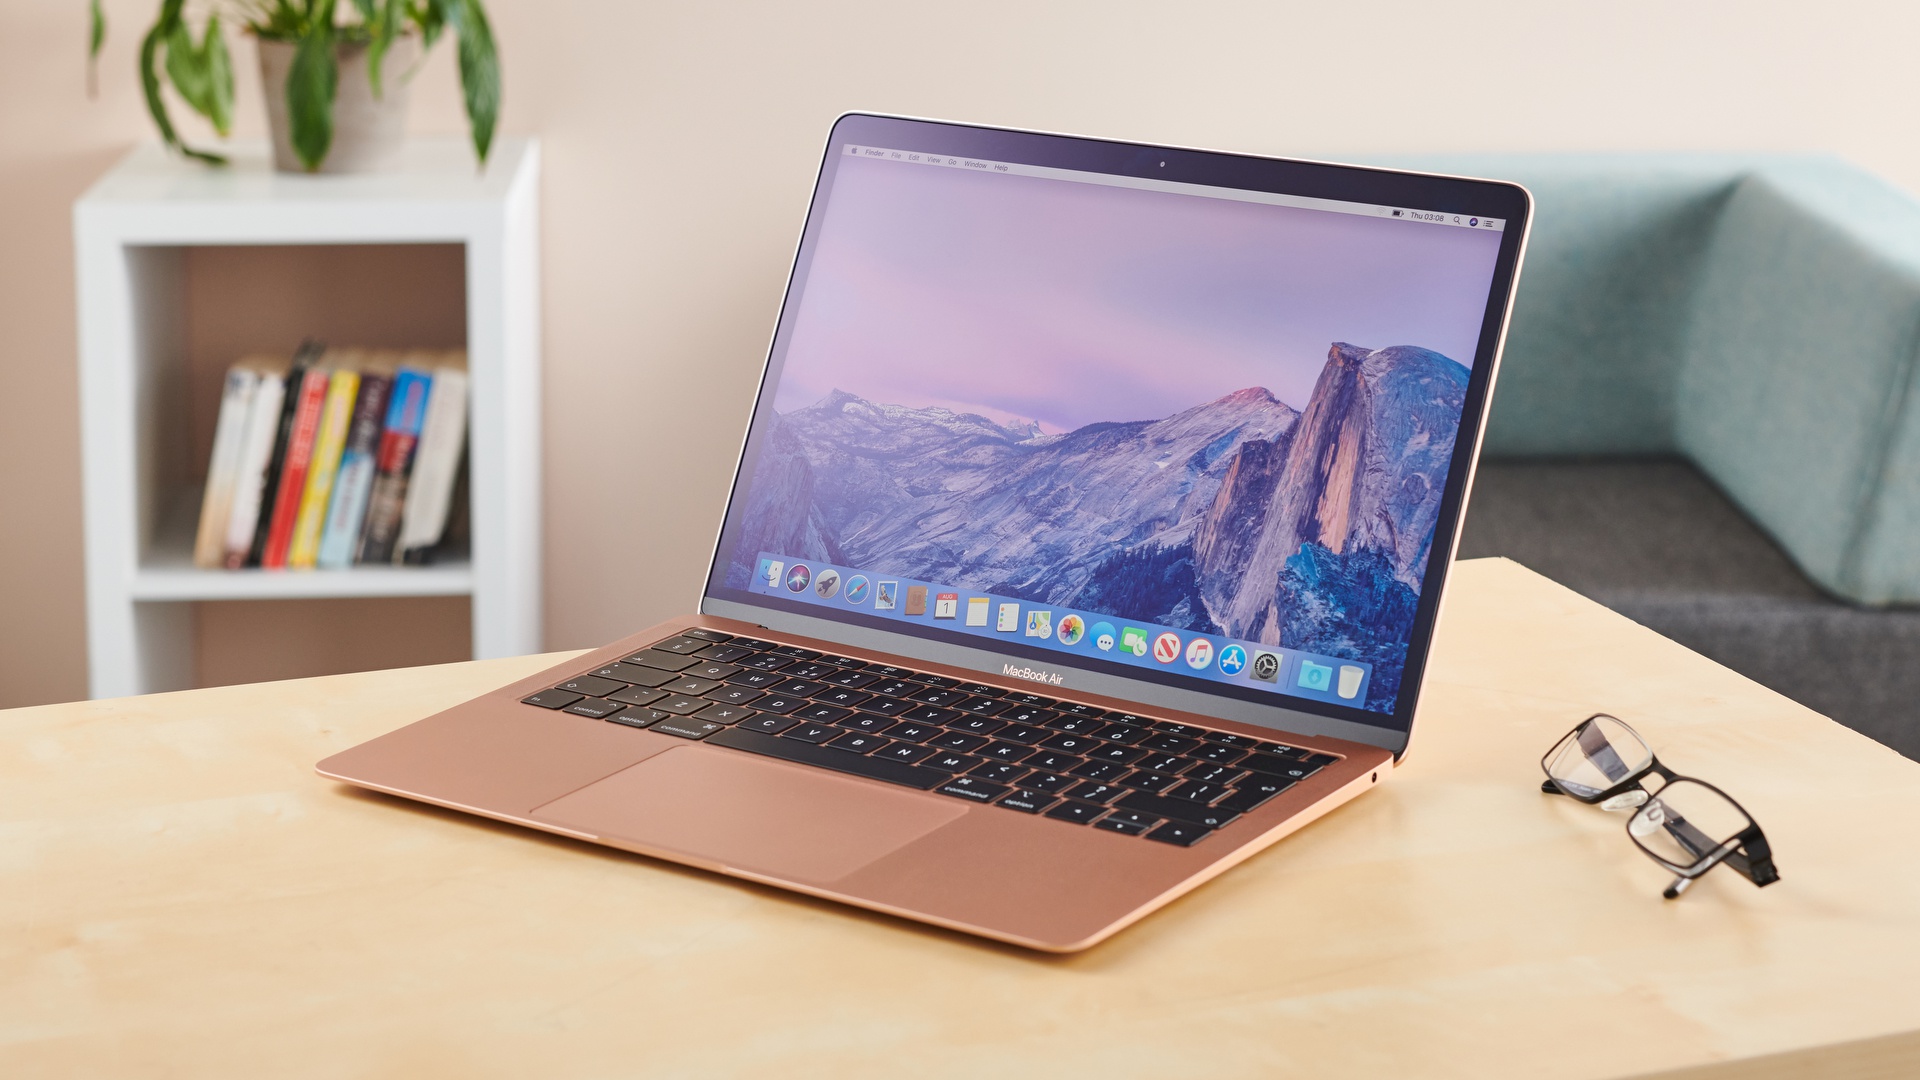 apple macbook air m1 review - an angled image of the rose gold macbook air m1 sitting on a wooden desk